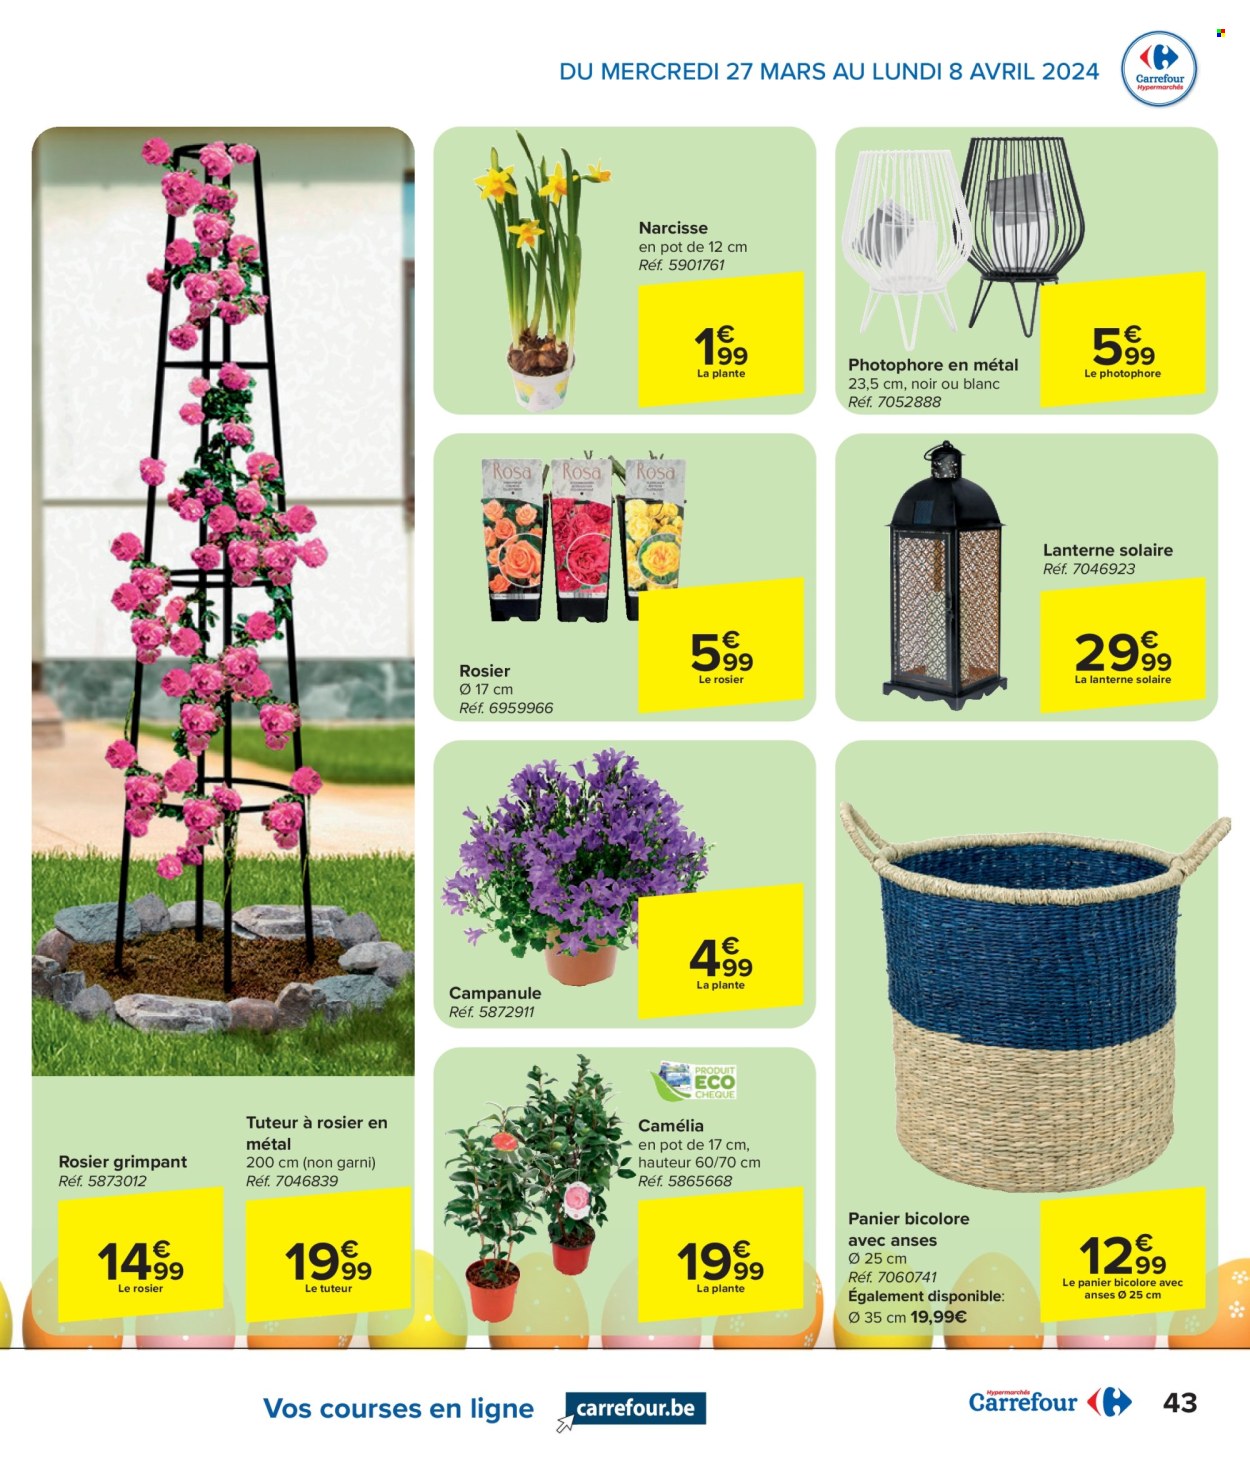 Catalogue Carrefour hypermarkt - 27.3.2024 - 8.4.2024. Page 43.